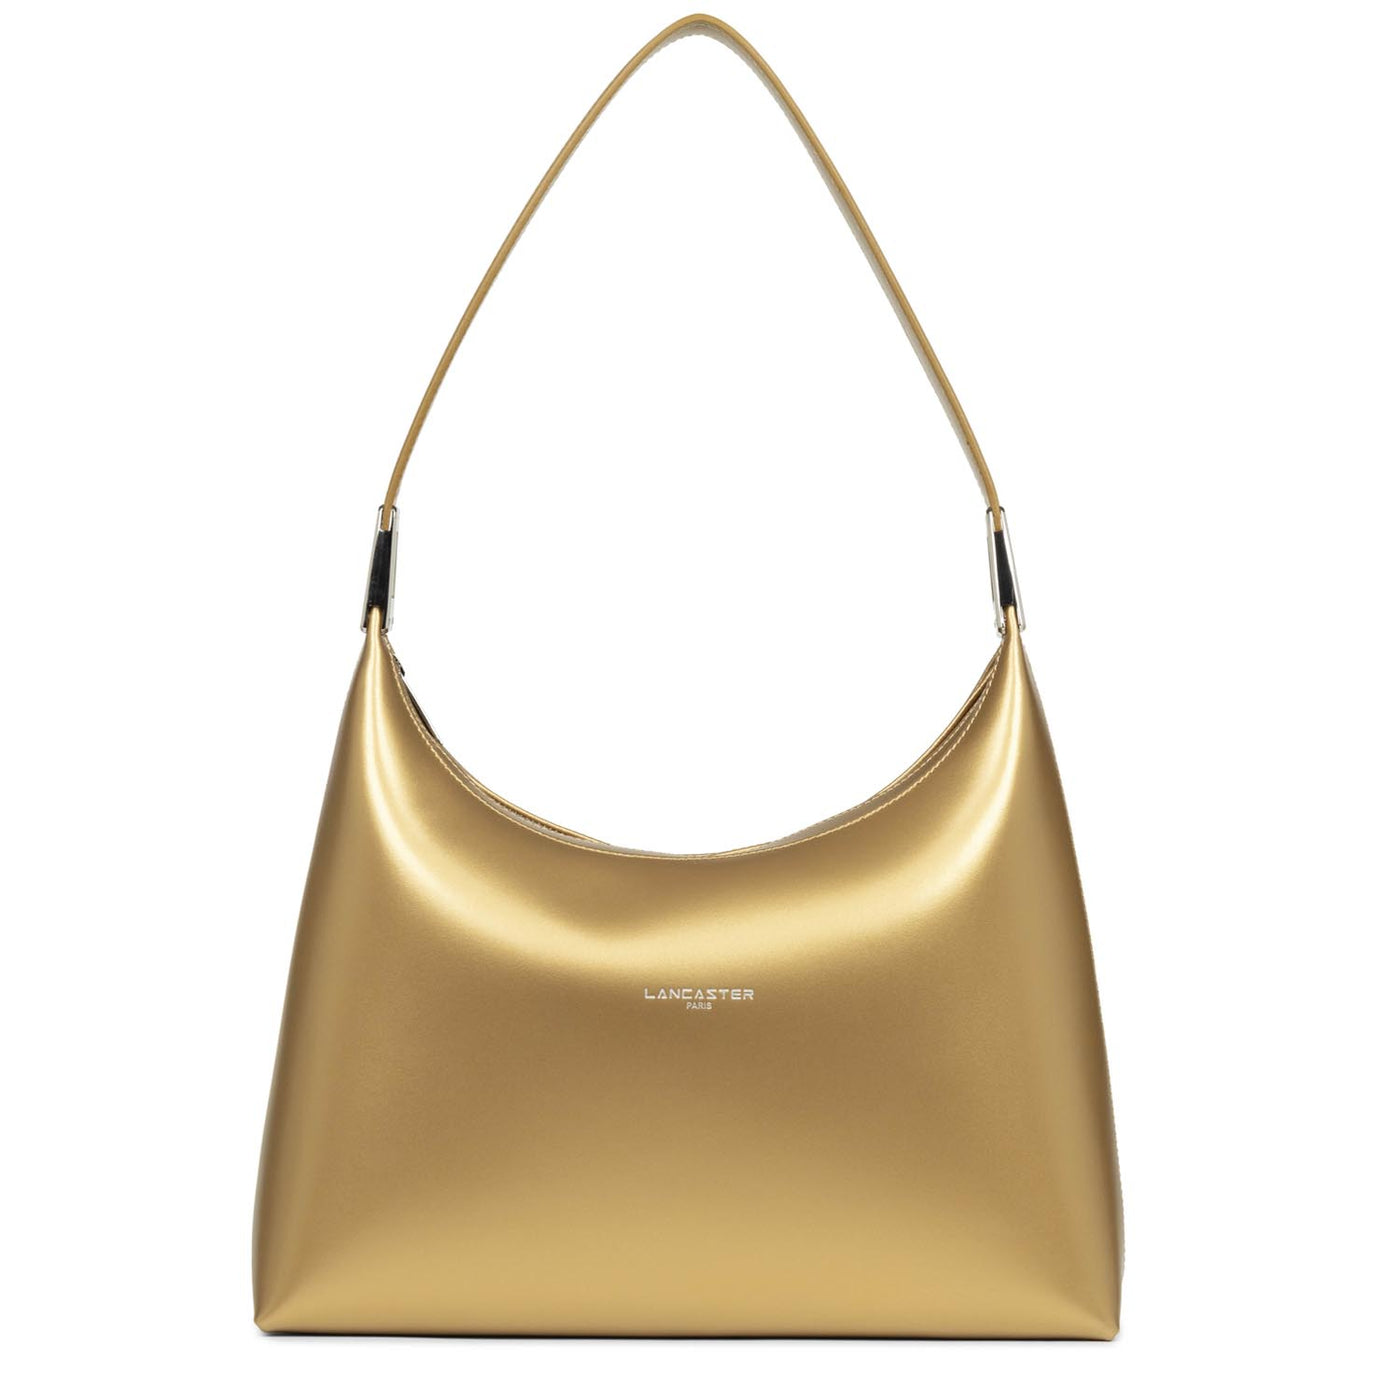 hobo bag - suave ace #couleur_gold-antic